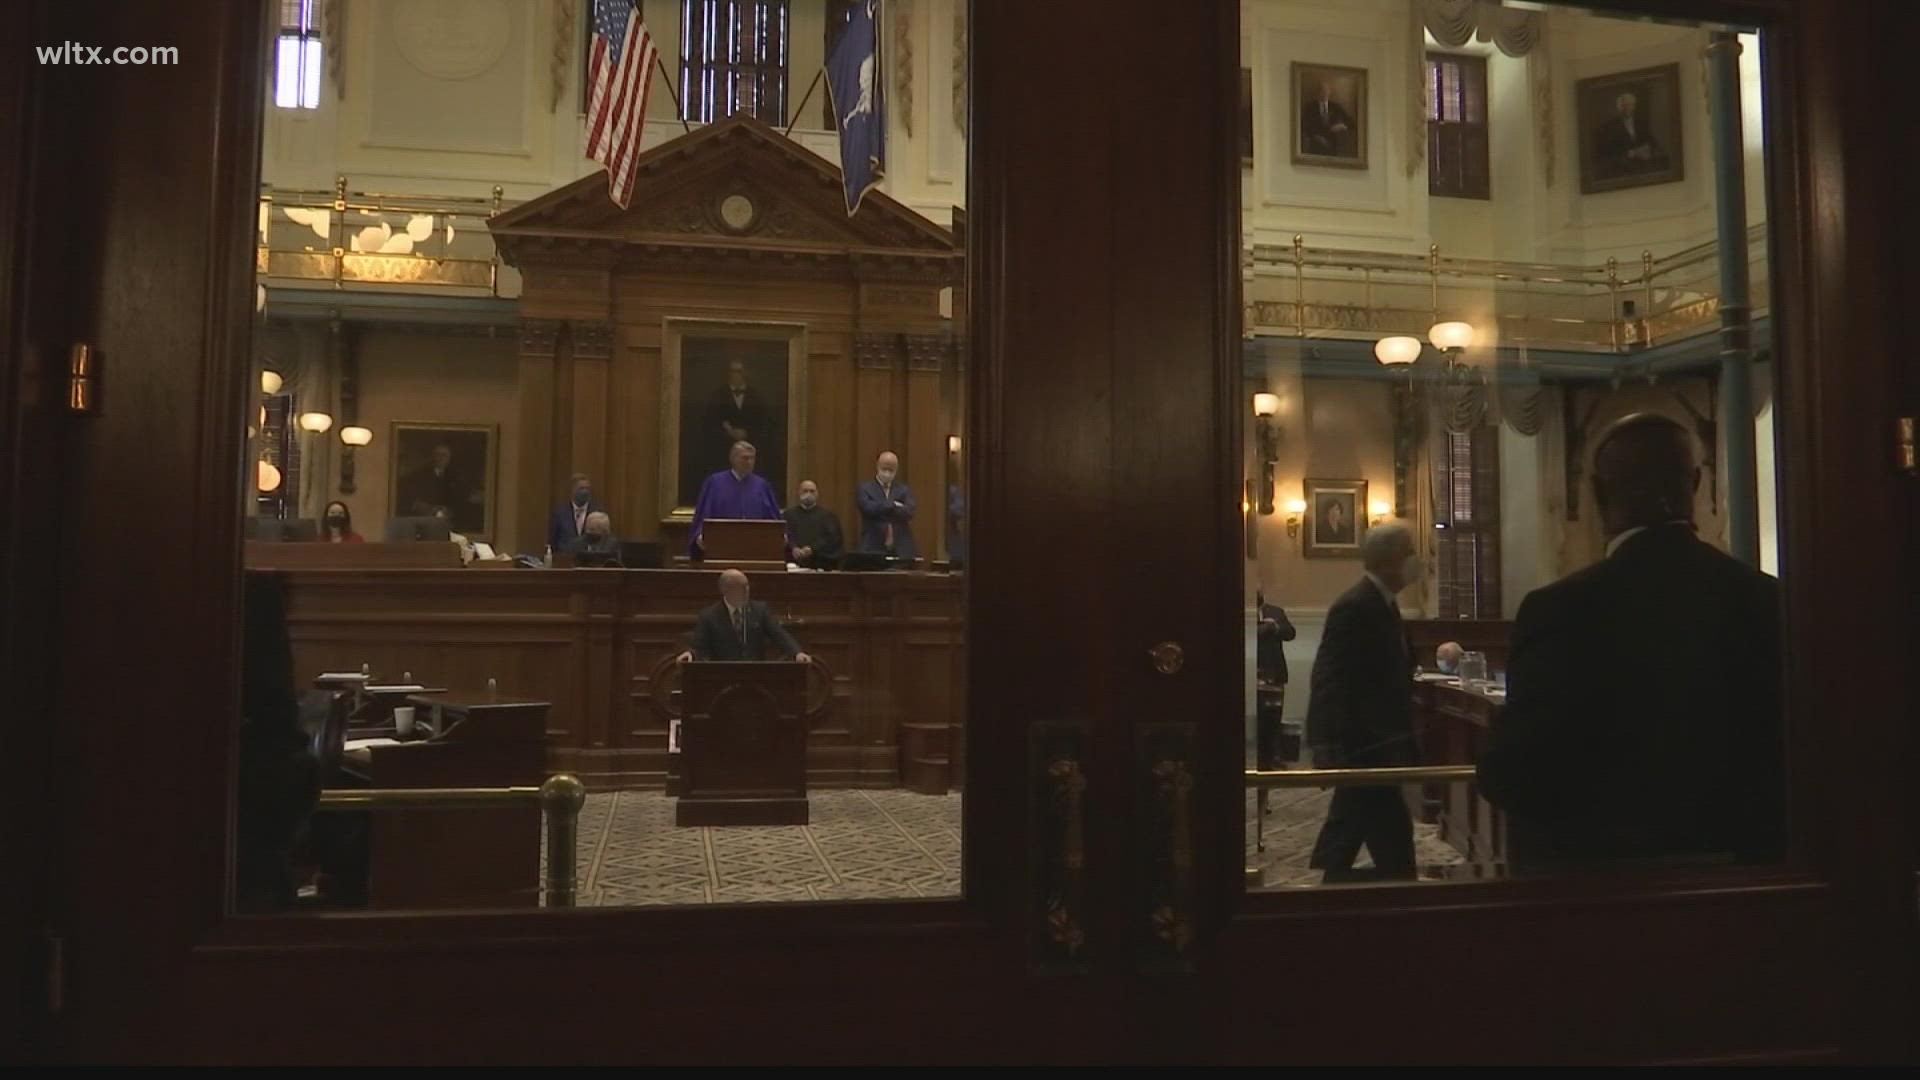 Now some lawmakers are hoping they can return to the state house to change the law.